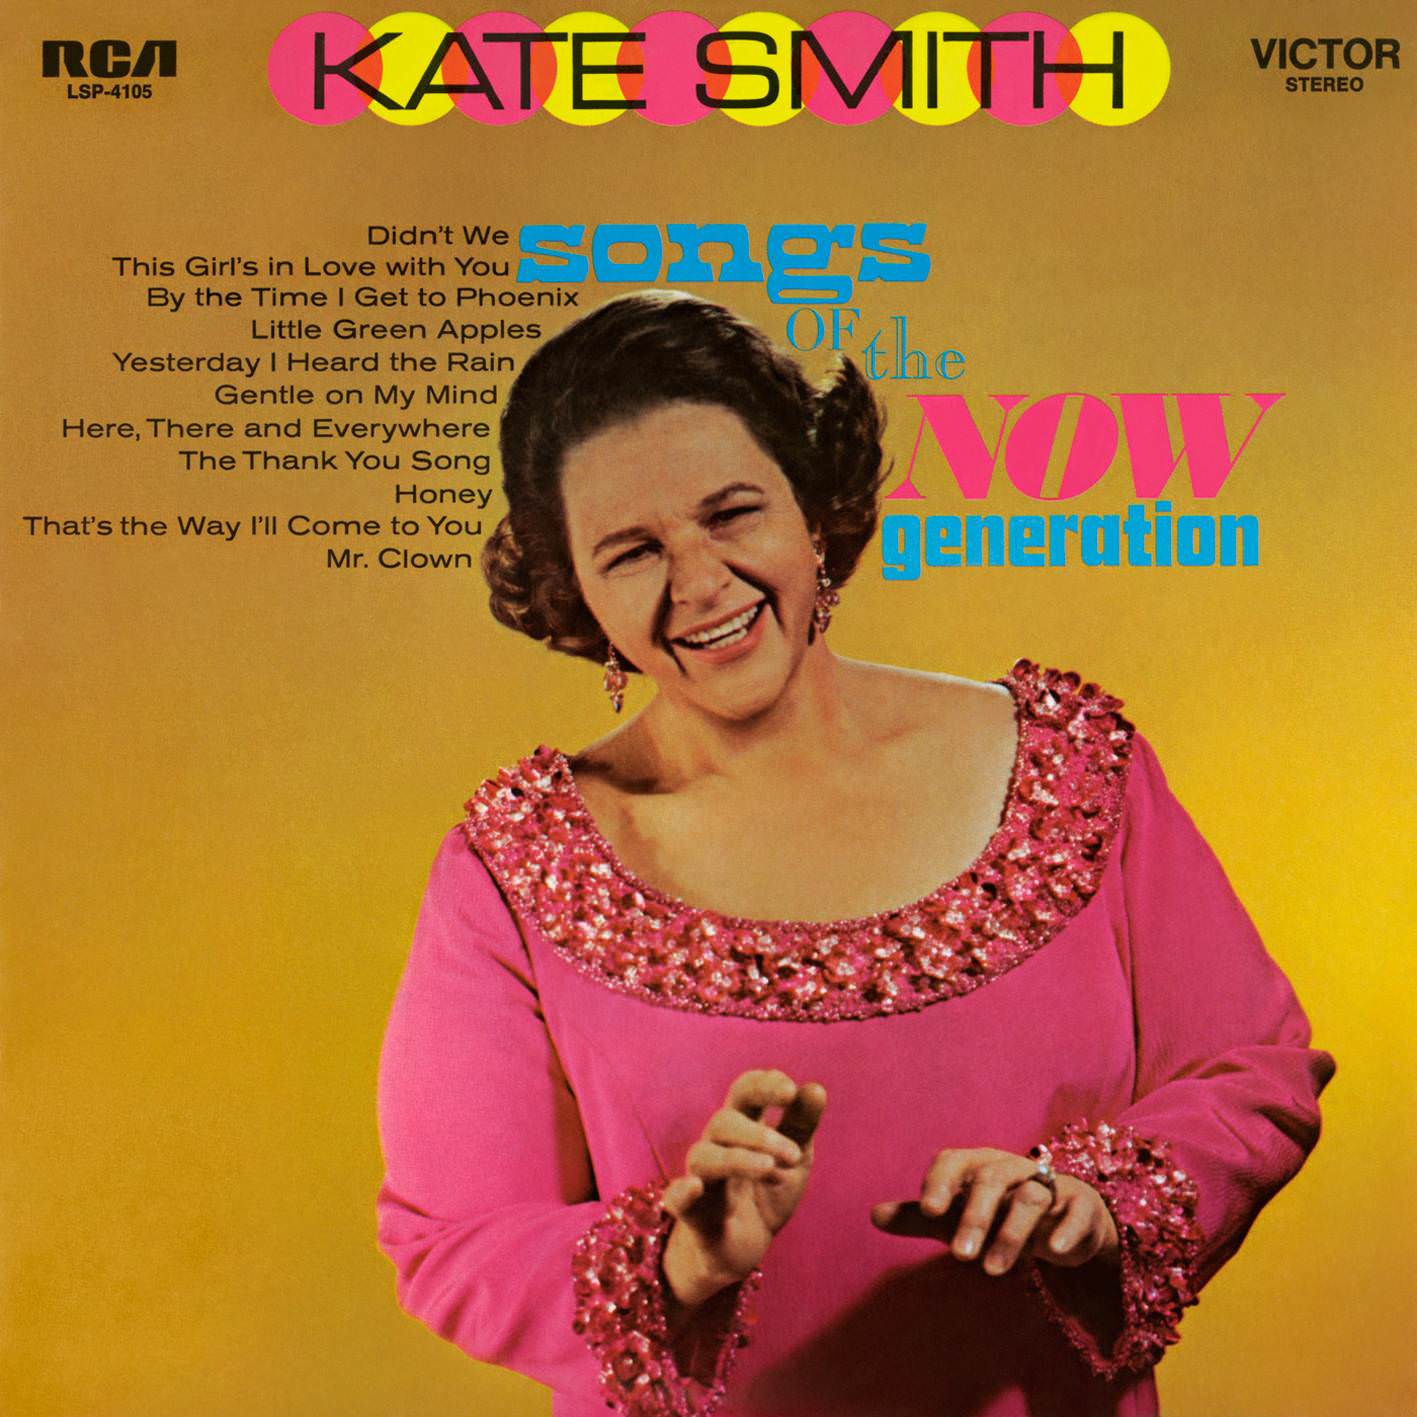 Kate Smith - Songs Of The Now Generation (1969/2018) [AcousticSounds FLAC 24bit/192kHz]